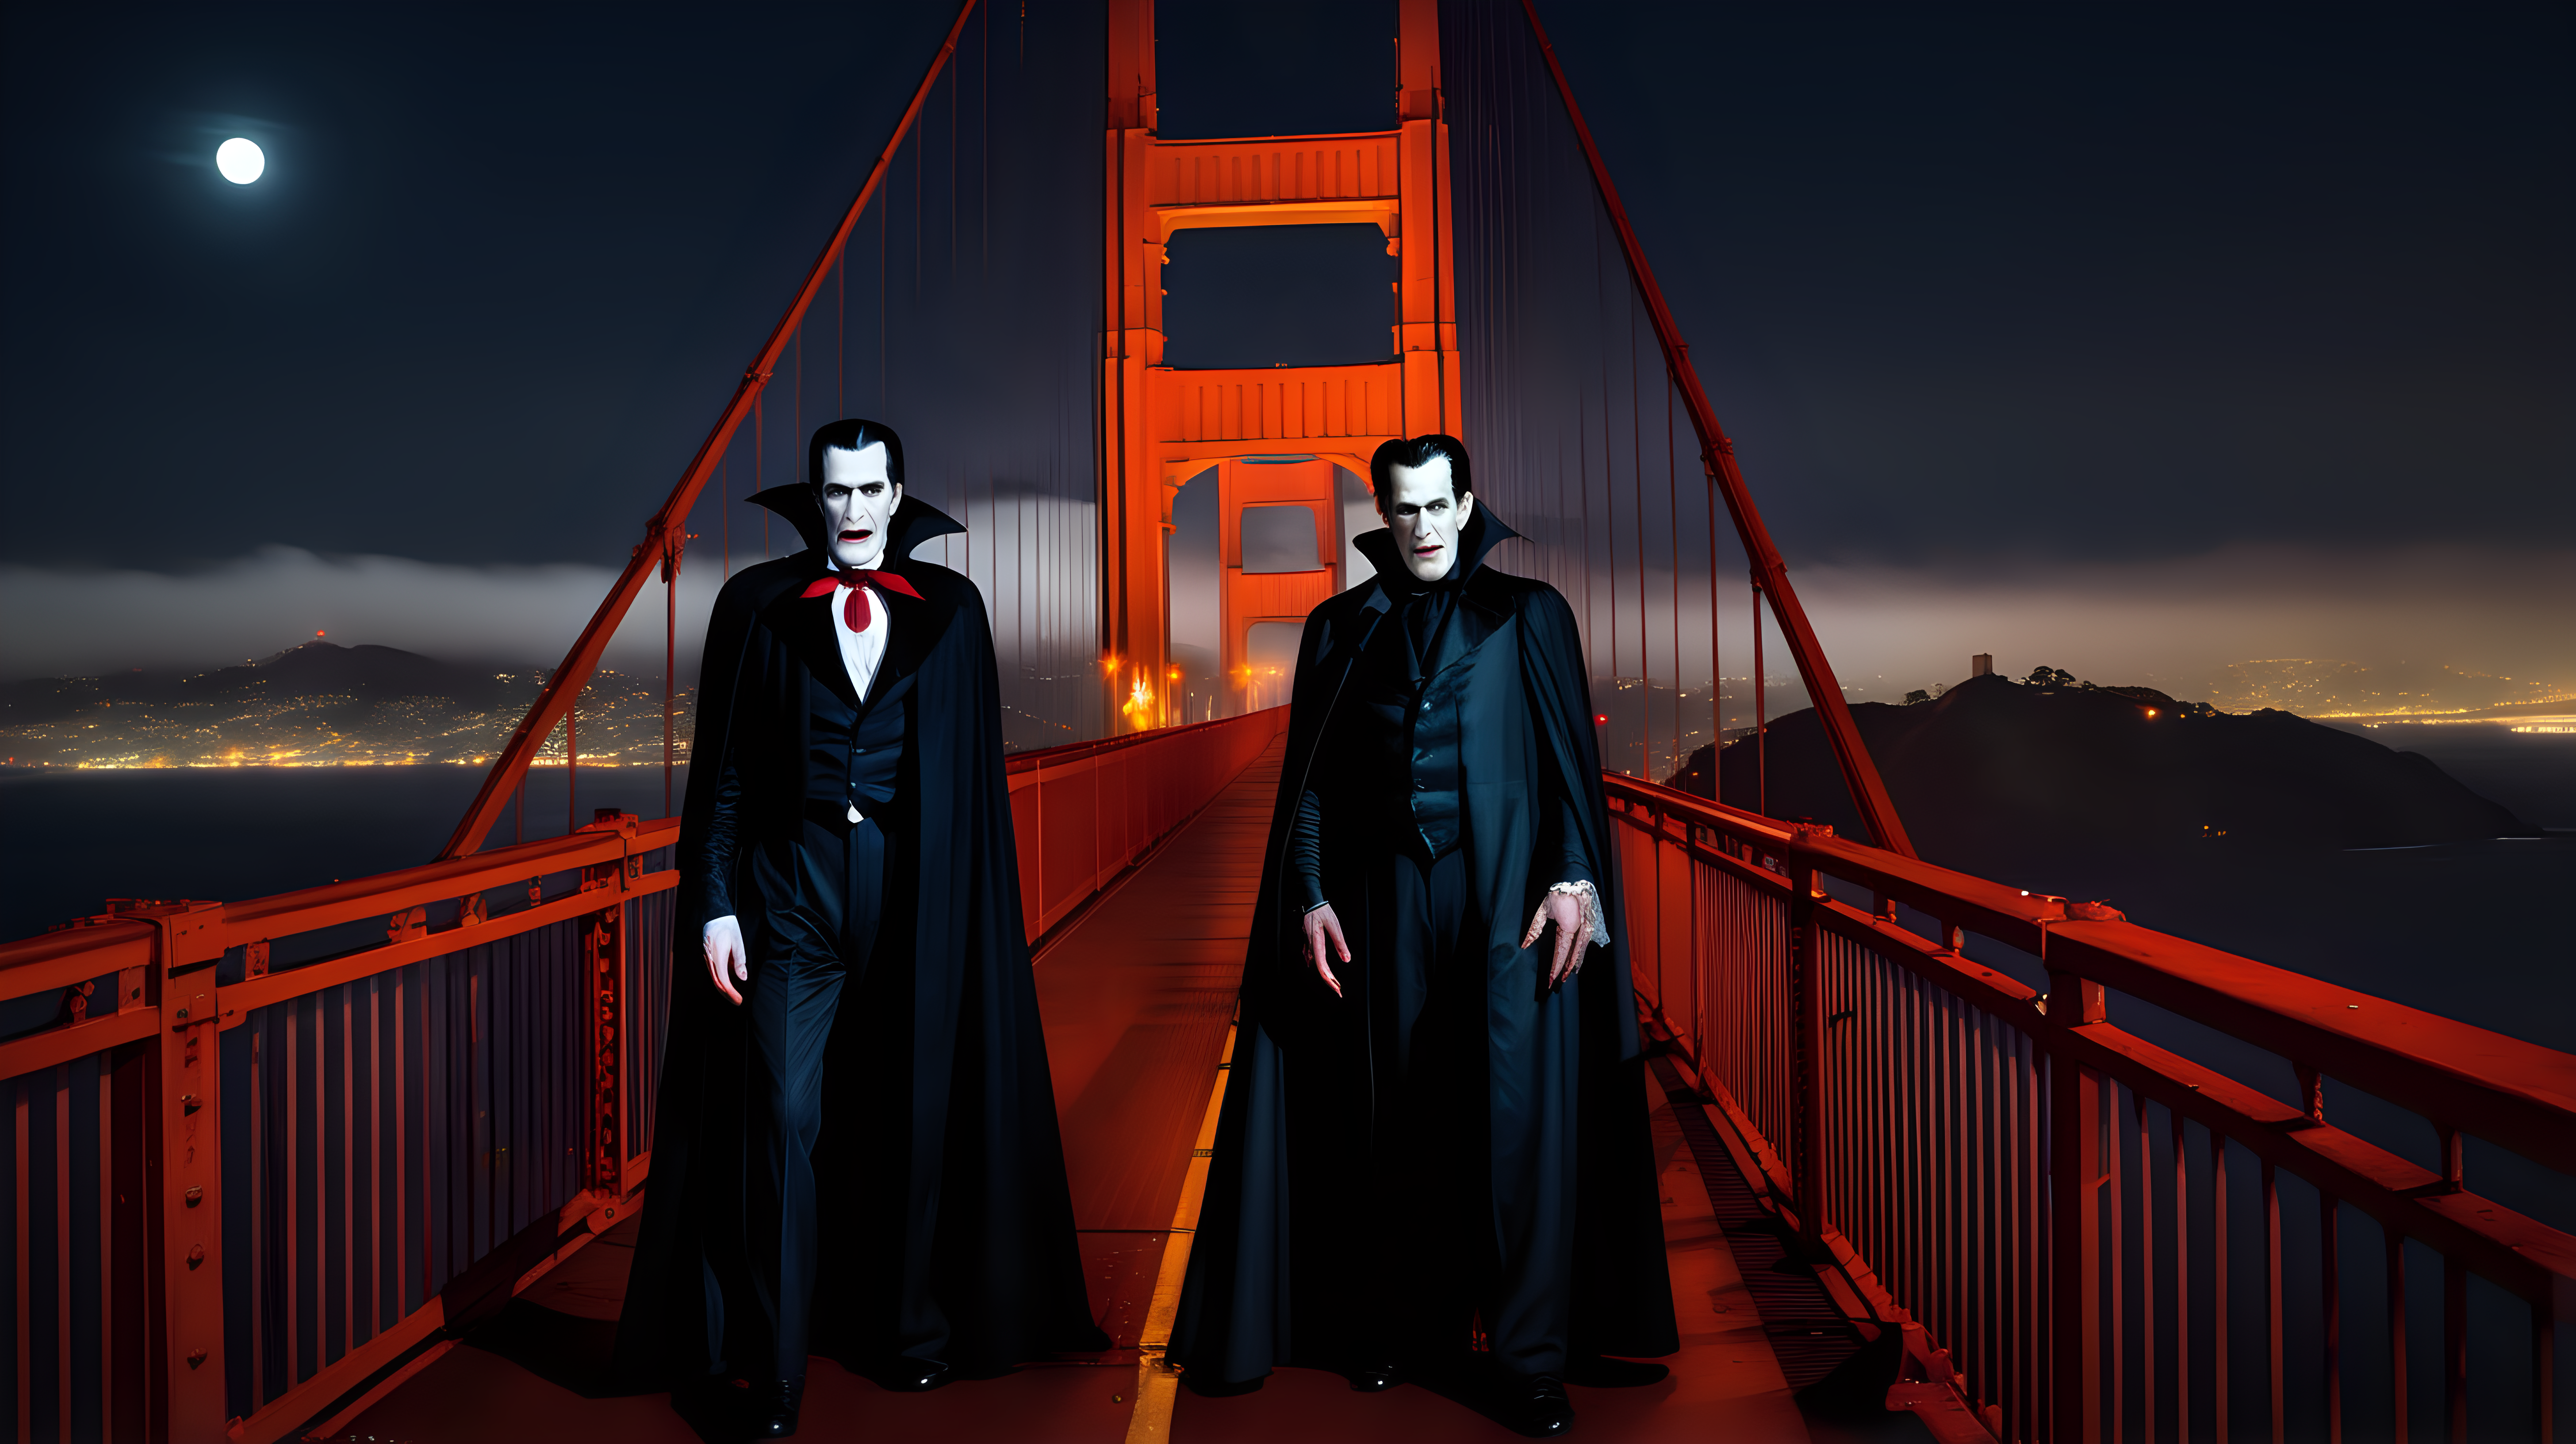 Dracula and Frankenstein on the Golden Gate Bridge at night